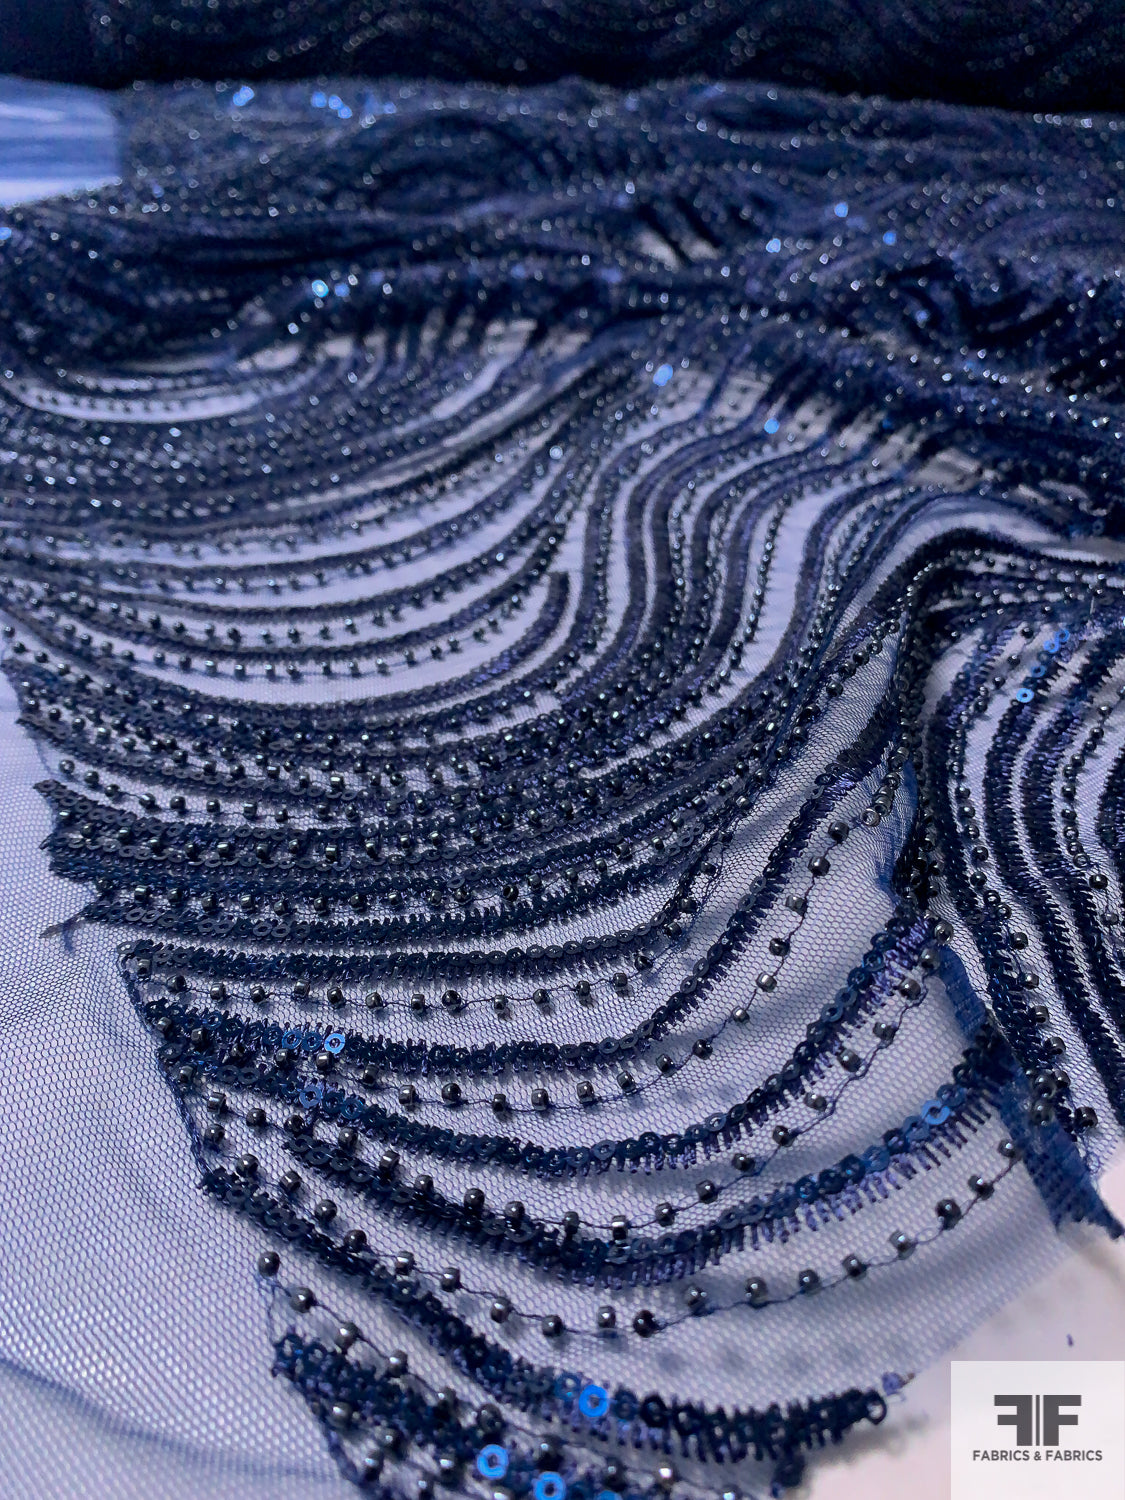 Wavy Lines Embroidered and Beaded Netting with Sequins - Navy